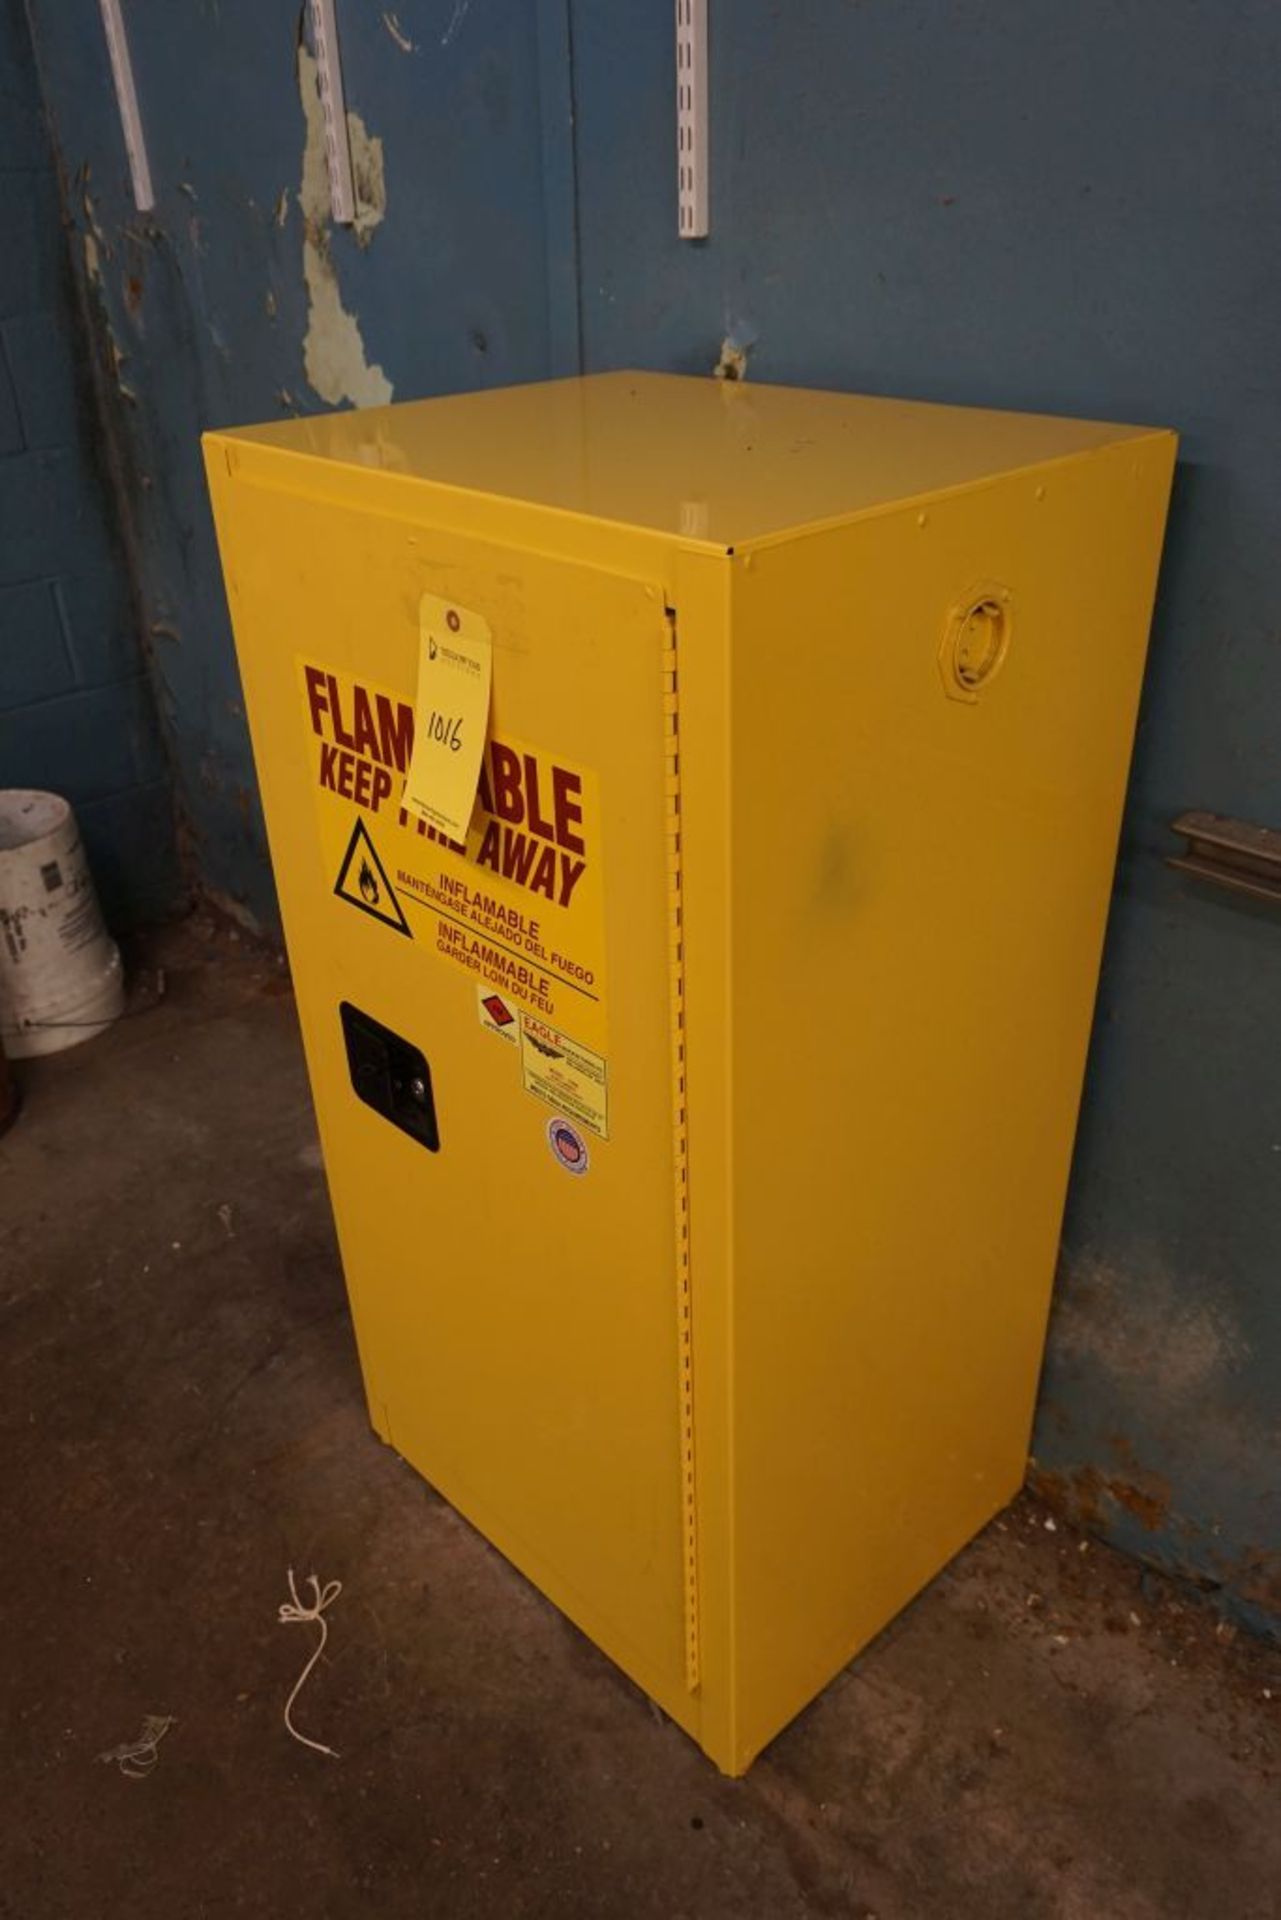 Eagle Flammable Storage Cabinet|16 Gallon Capacity|Lot Tag: 1016 - Image 2 of 2